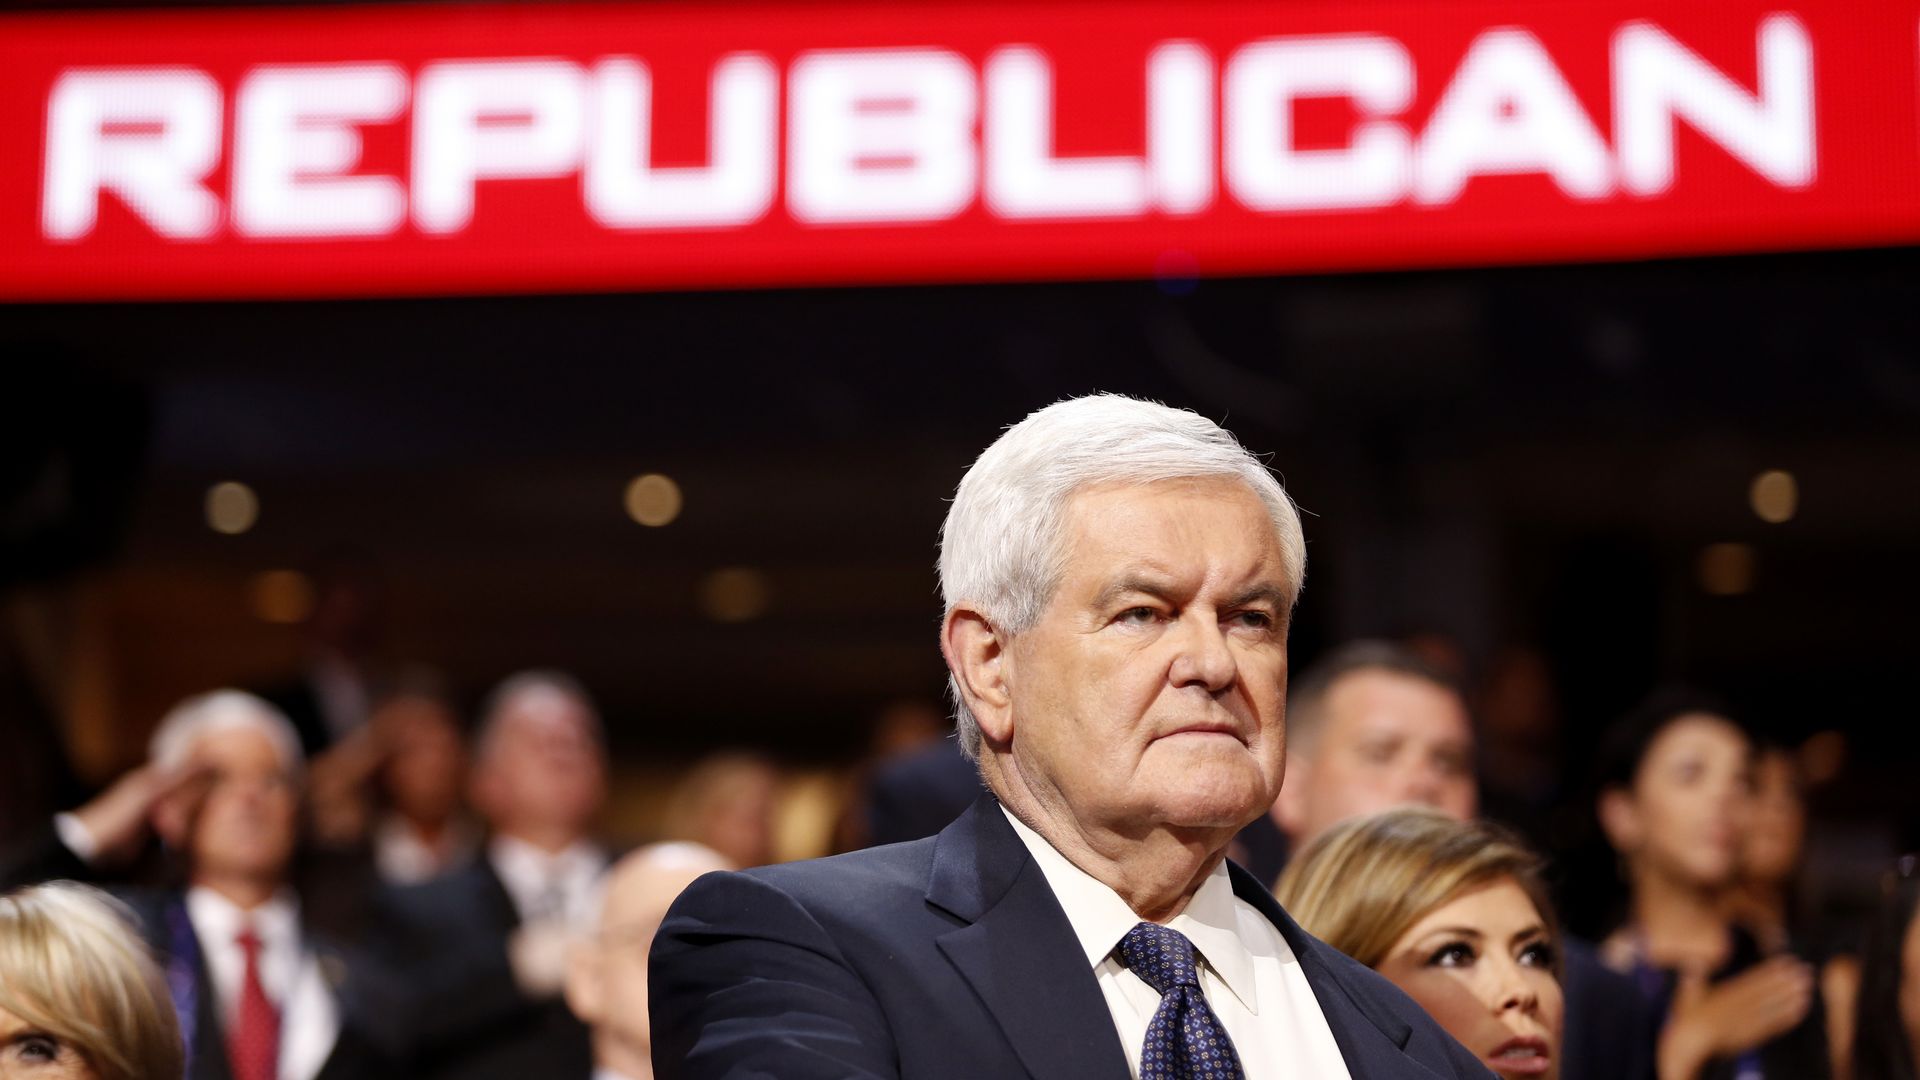 Newt Gingrich, former speaker of the U.S. House of Representatives, stands during the Pledge of Allegiance.